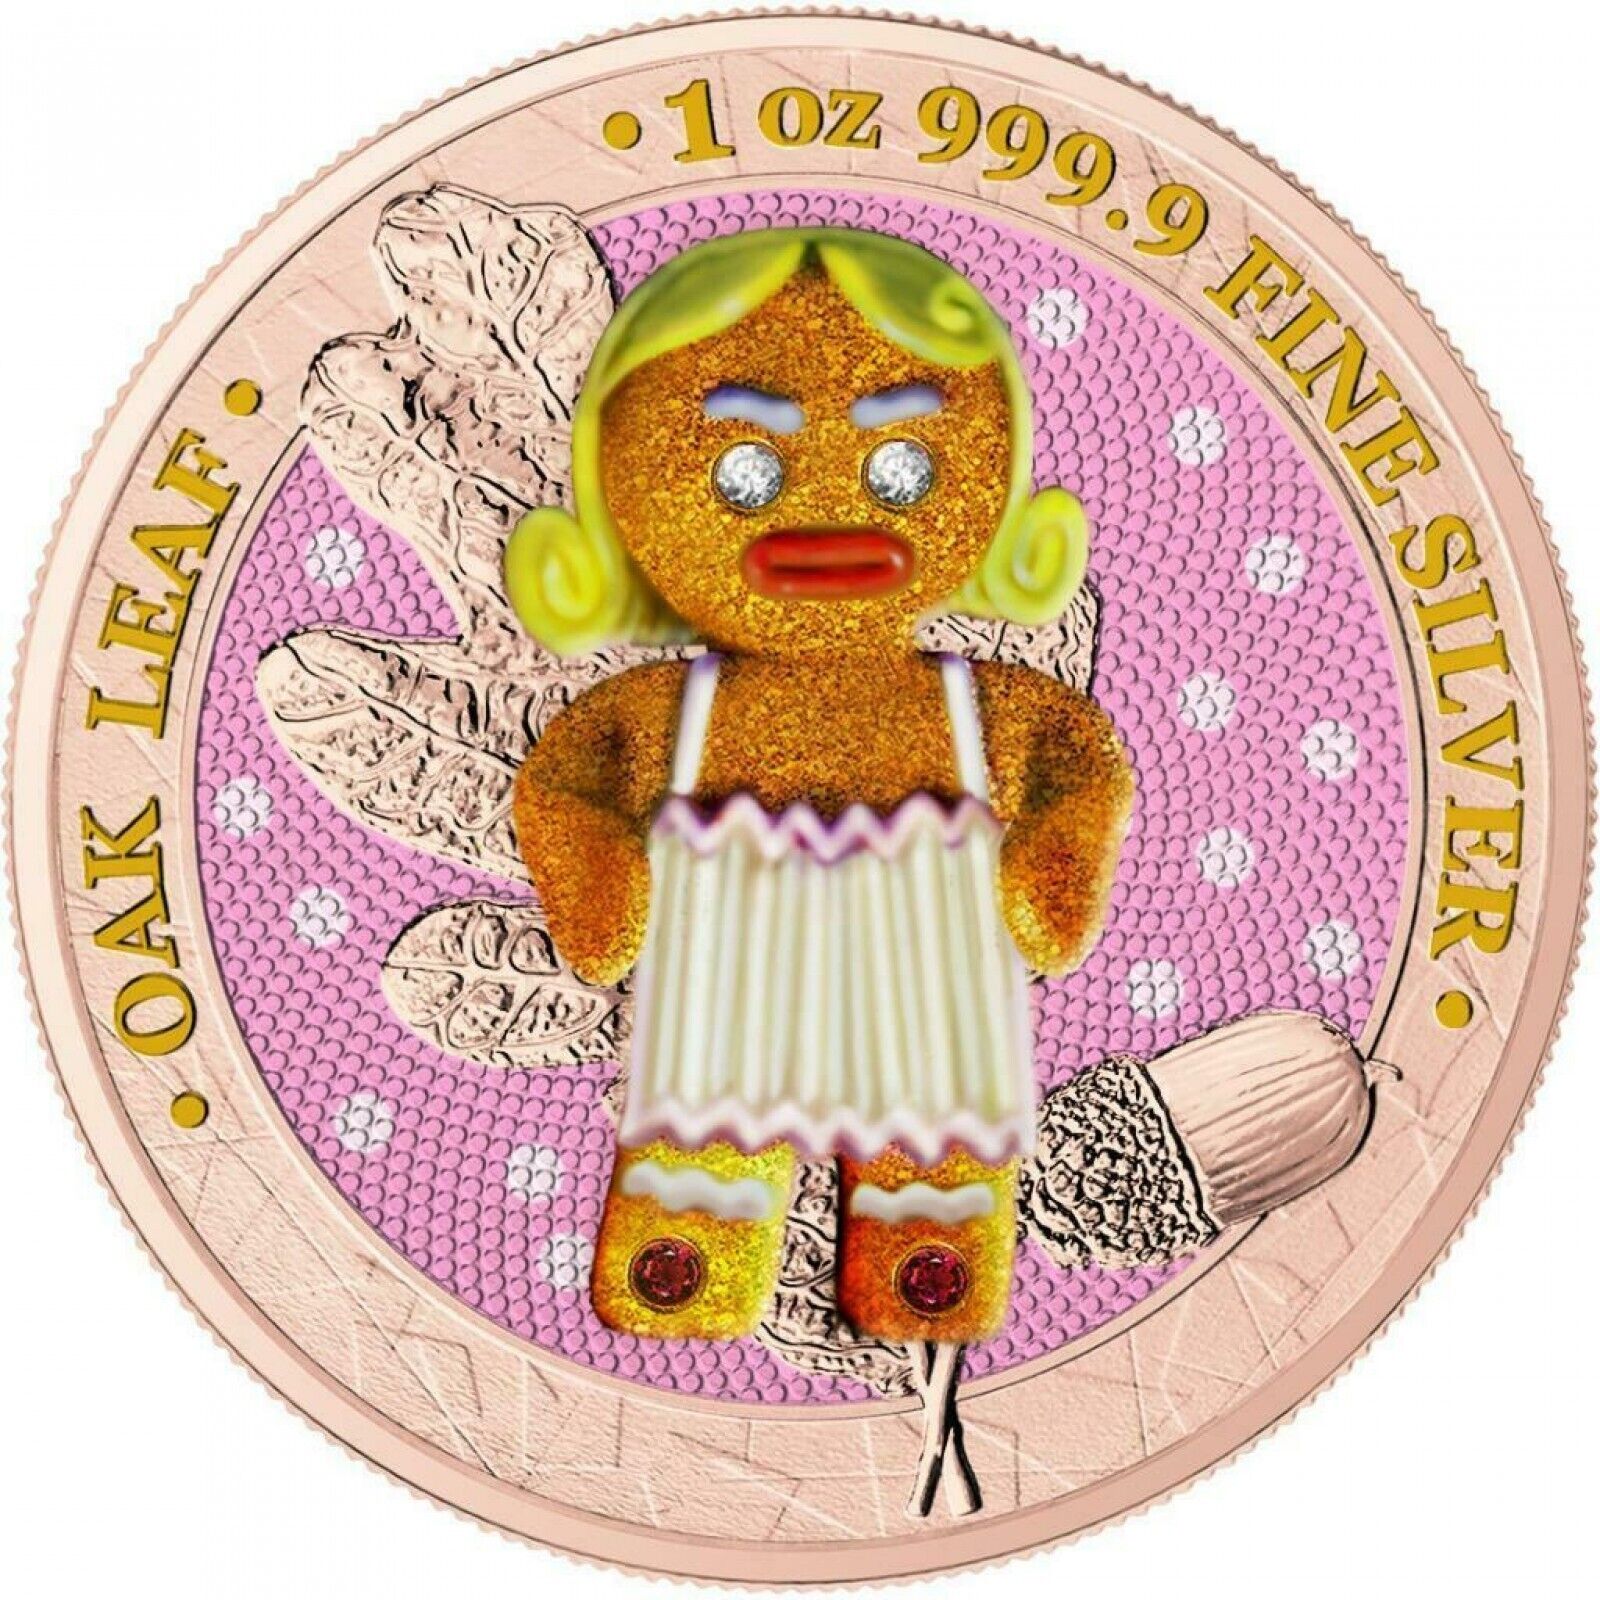 1 Oz Silver Coin 2019 5 Mark Germania Oak Leaf Bejeweled Gingerbread Angry Mommy-classypw.com-1